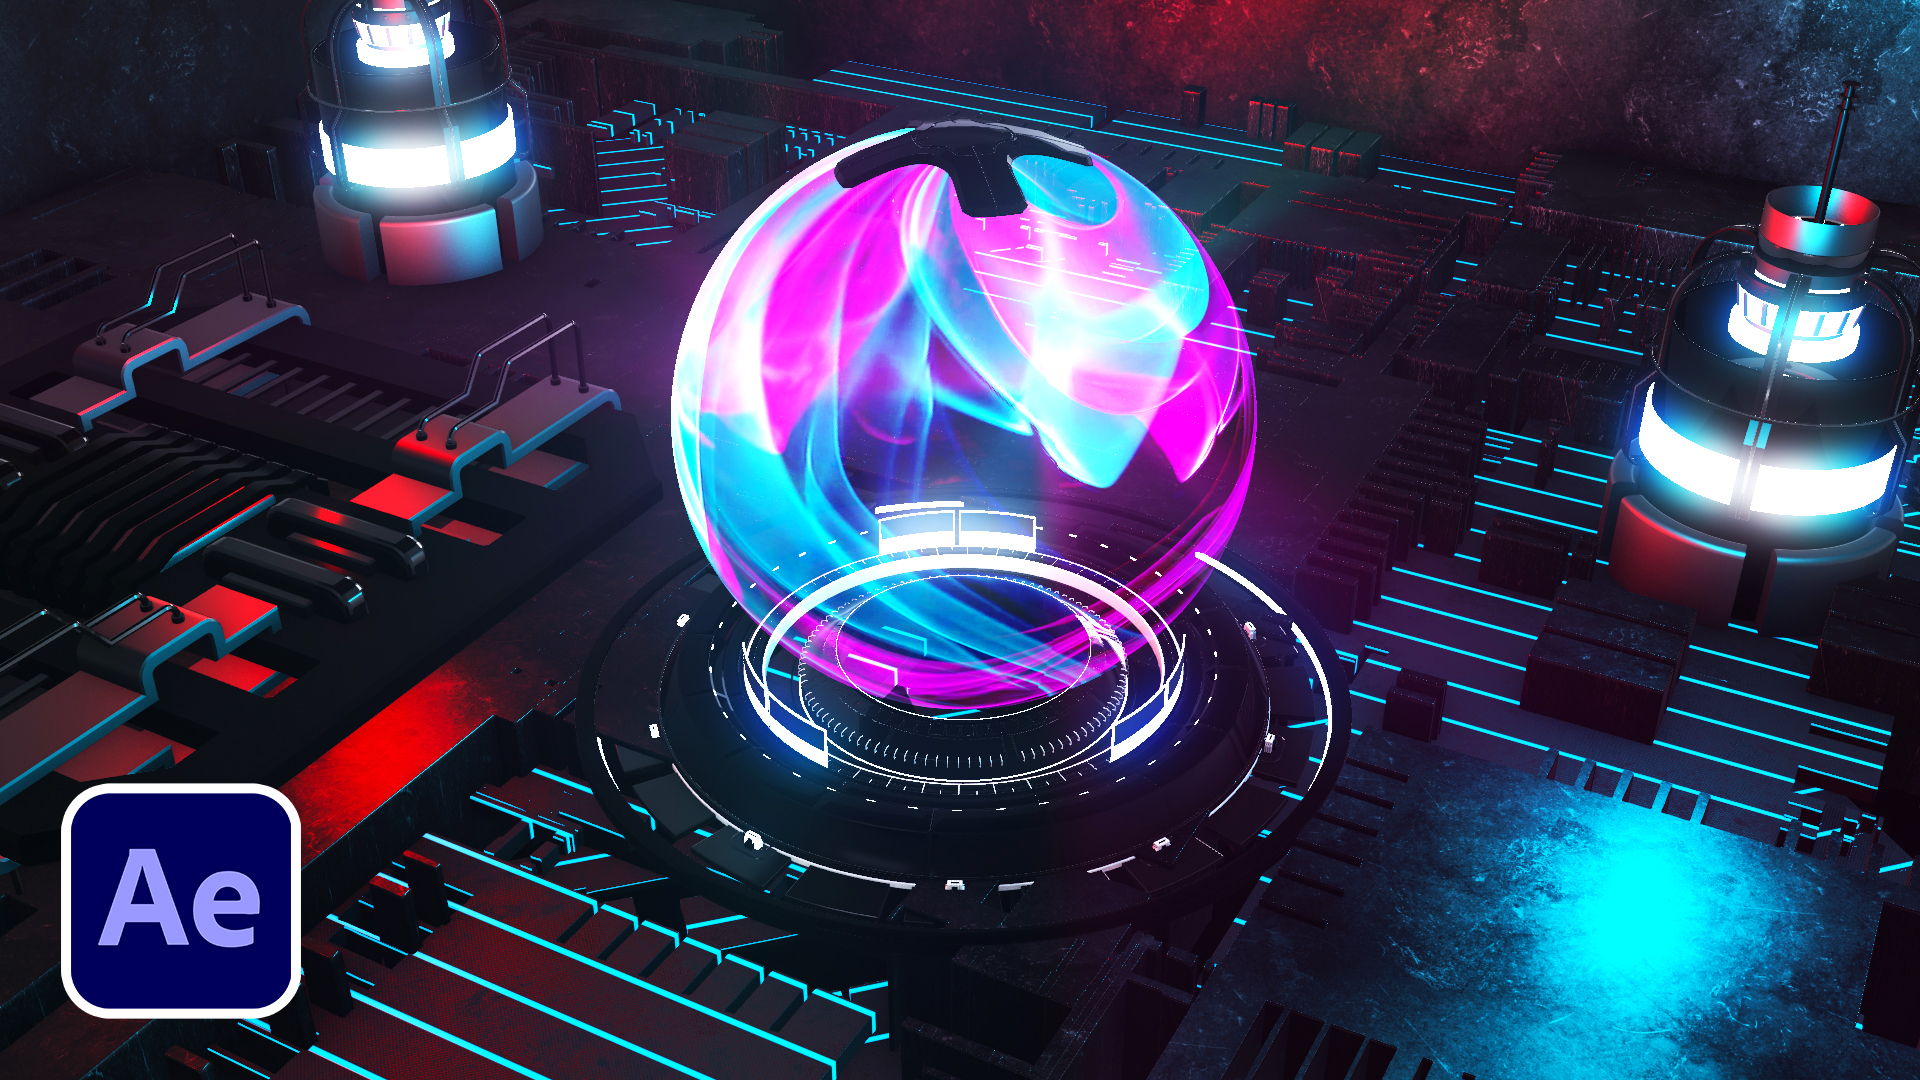 3д after effects. Афтер эффект 3д. 3d elements. Element 3d after Effects. Element 3d after Effects 2022.